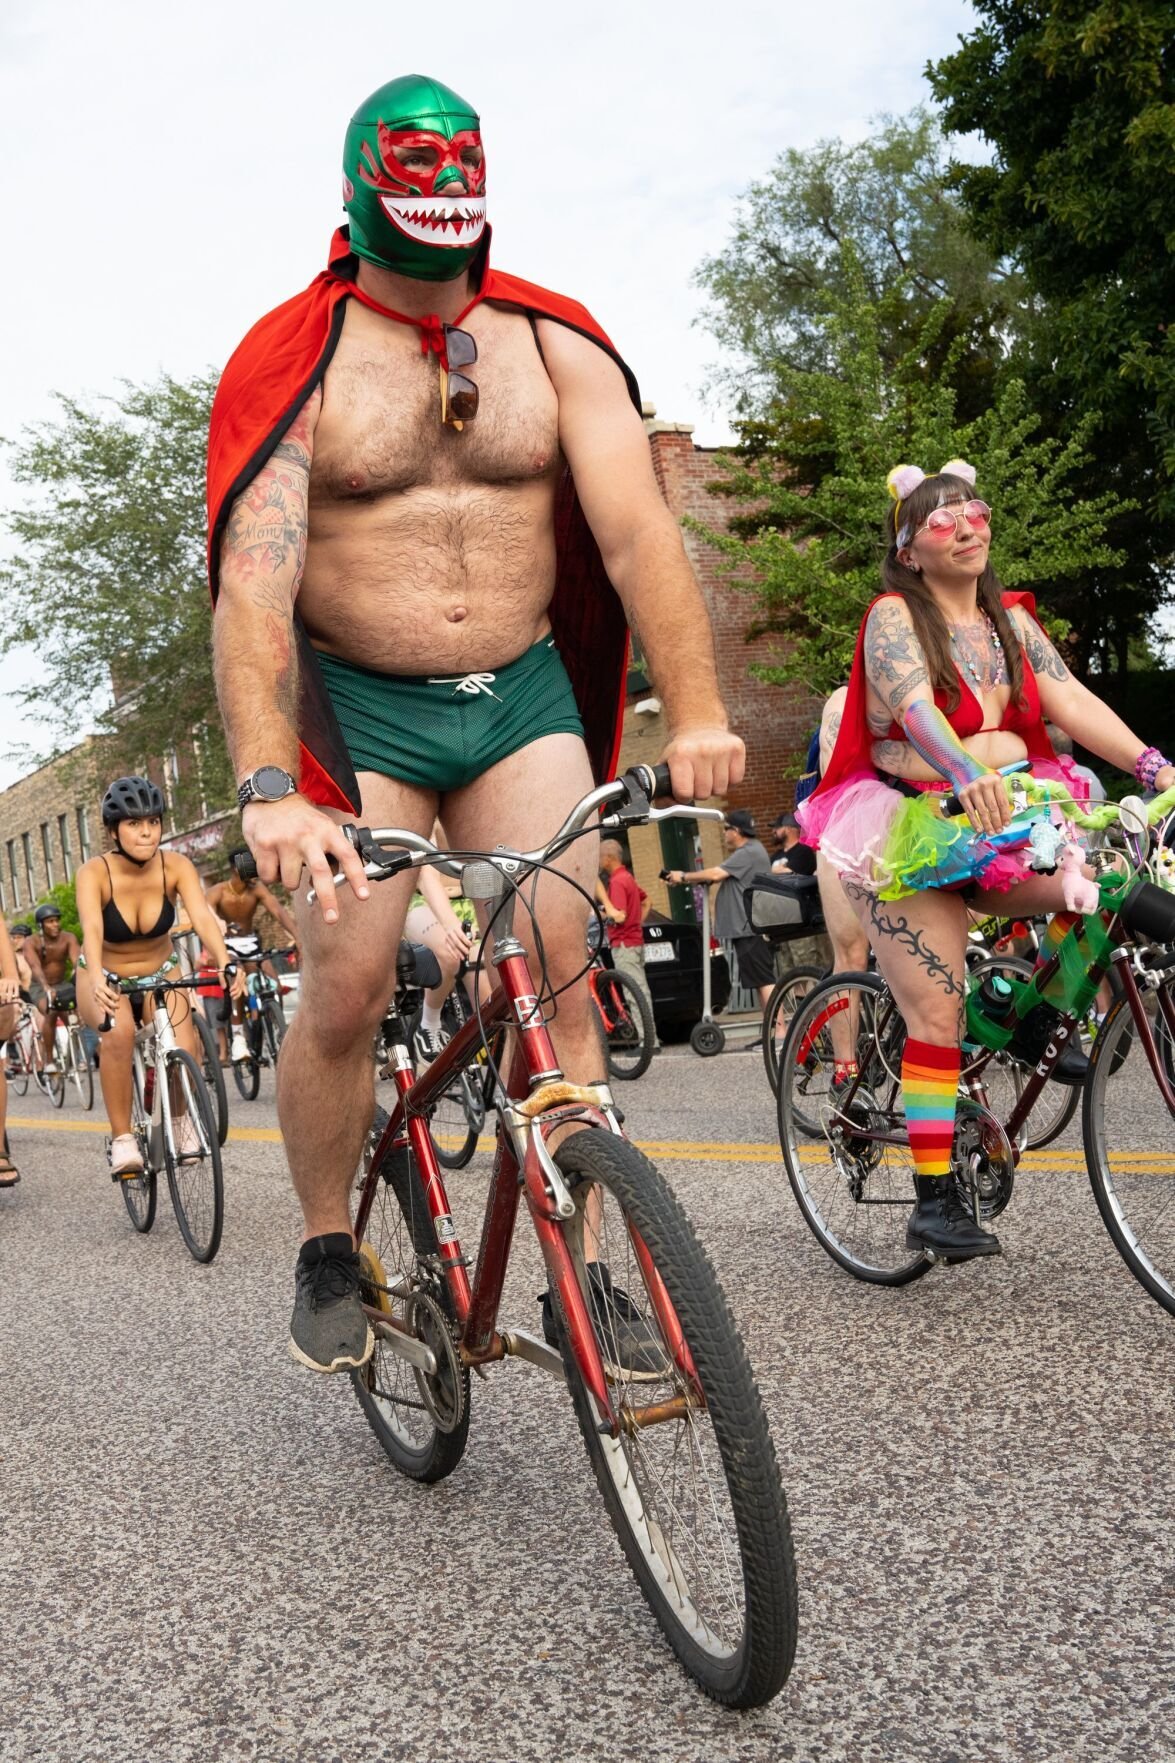 Photos: Scenes from the World Naked Bike Ride